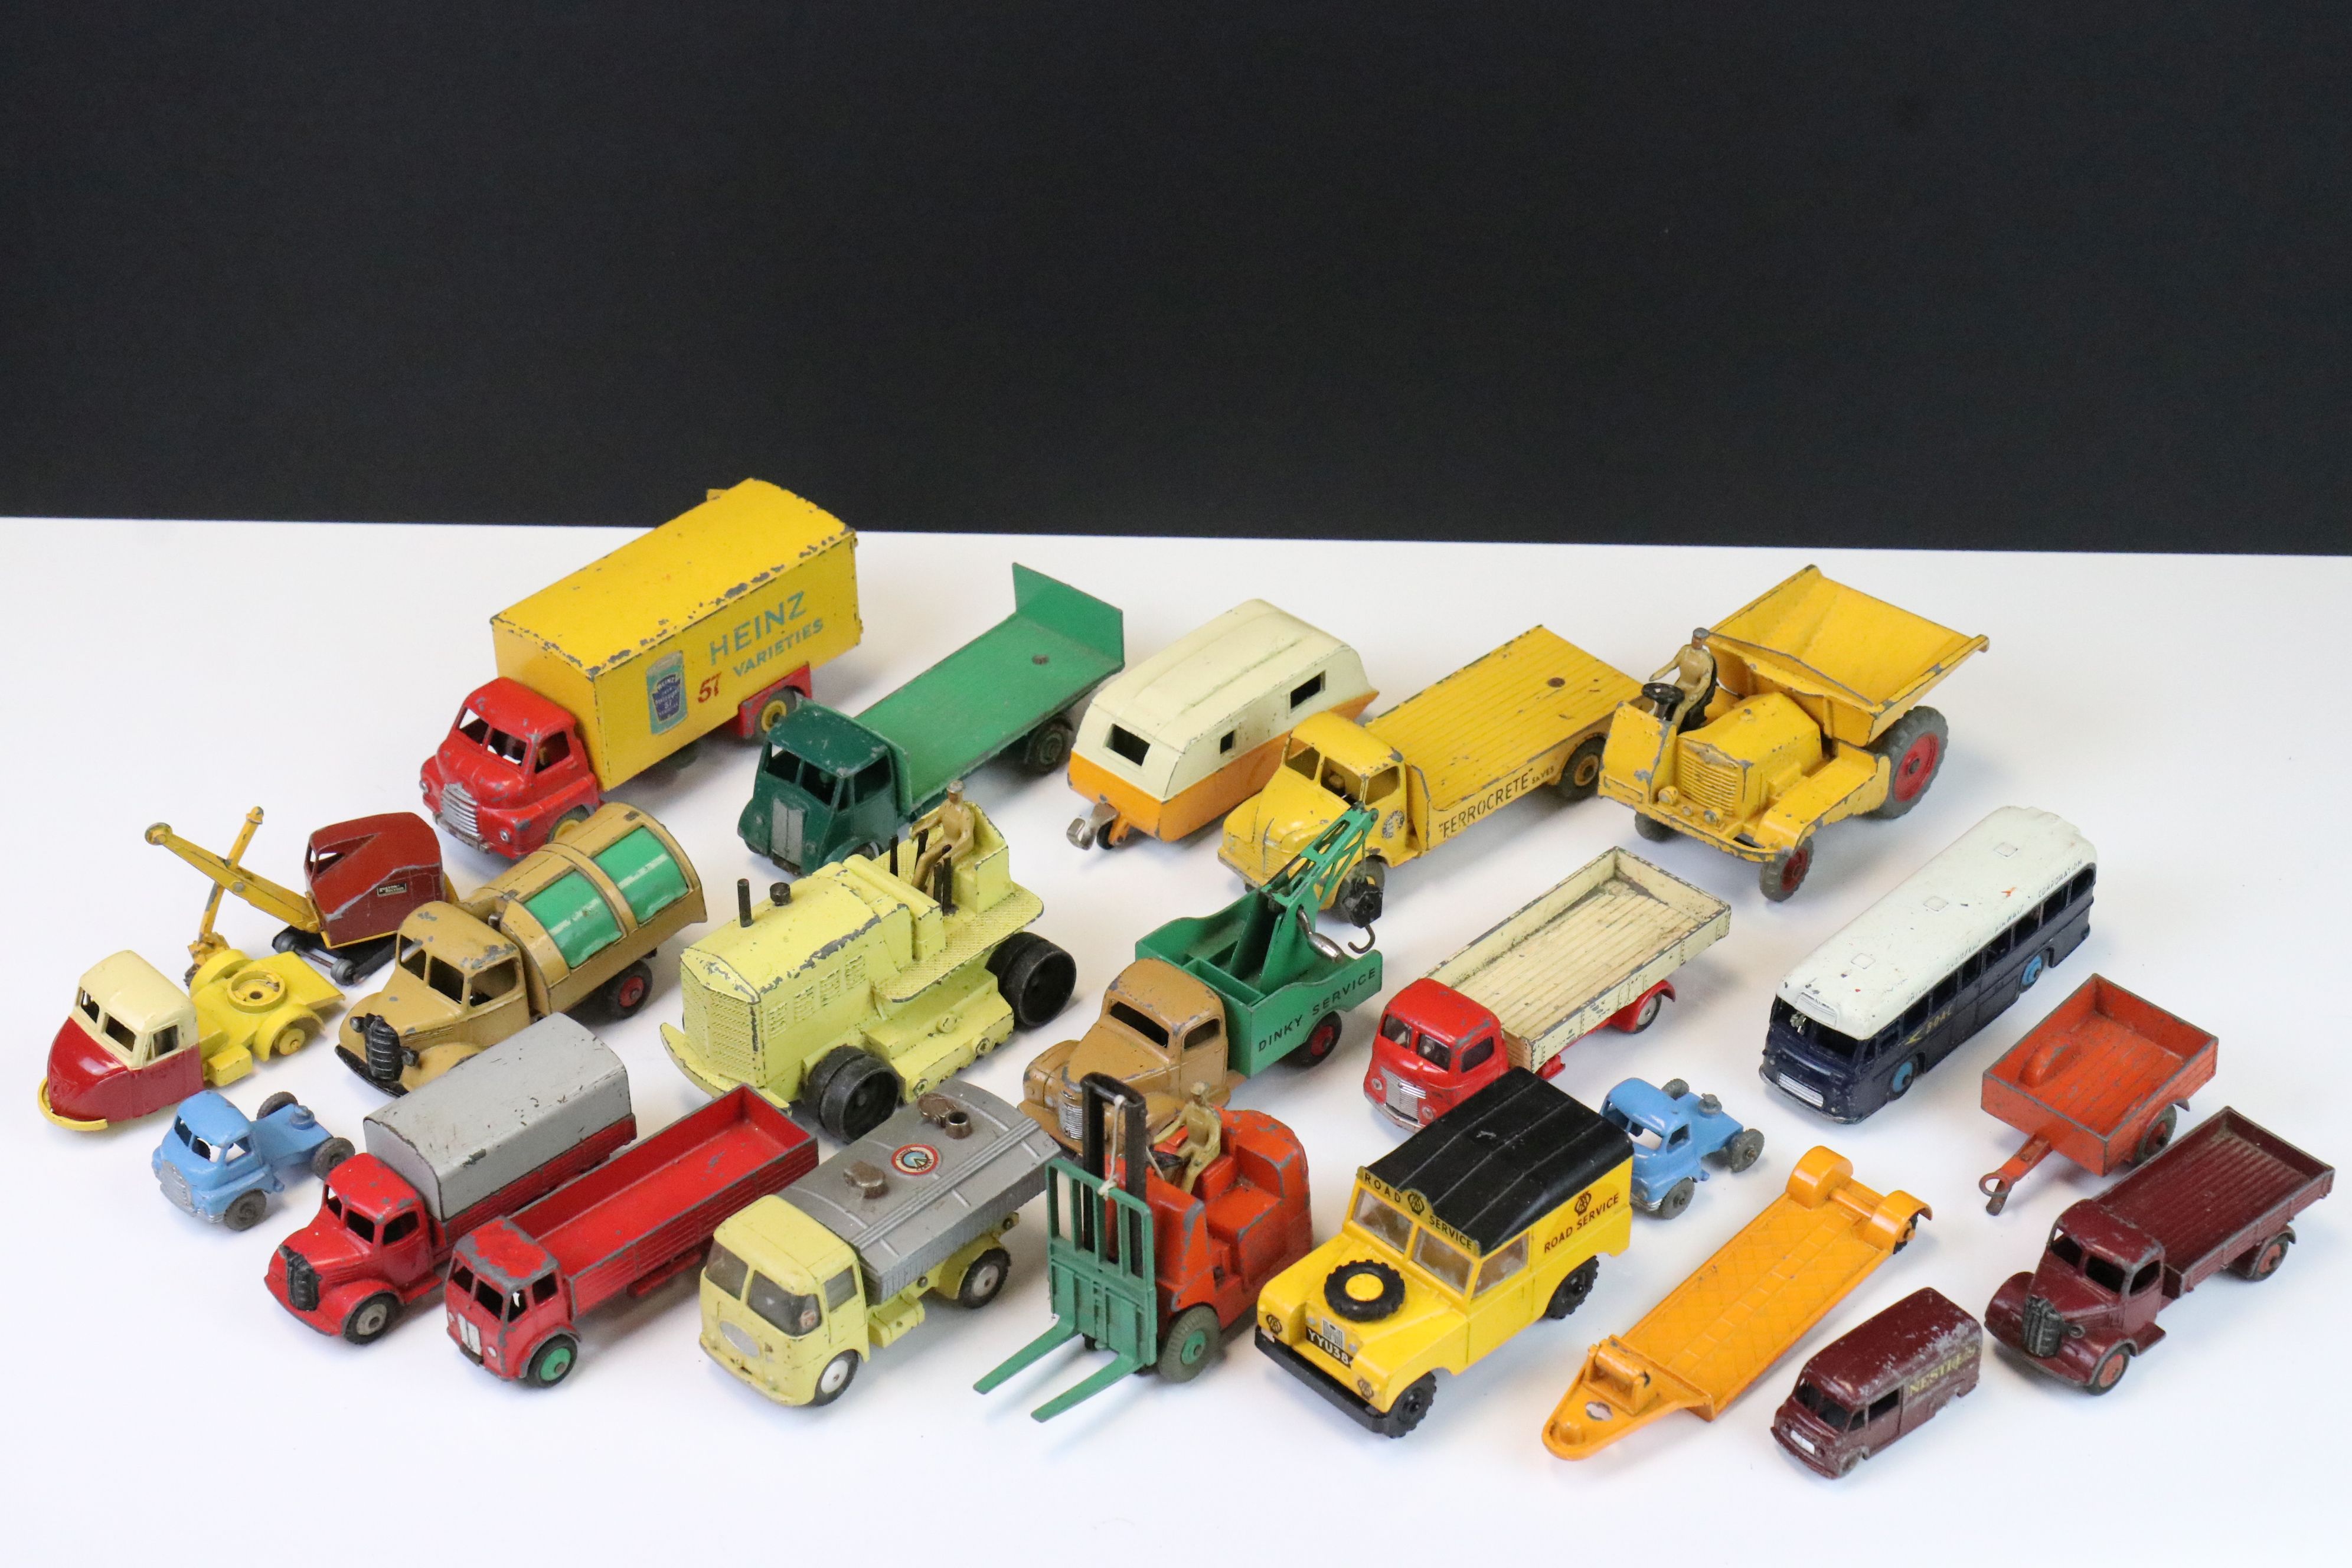 Around 20 mid 20th C play worn diecast models, featuring Dinky, Corgi, Budgie & Matchbox Lesney, all